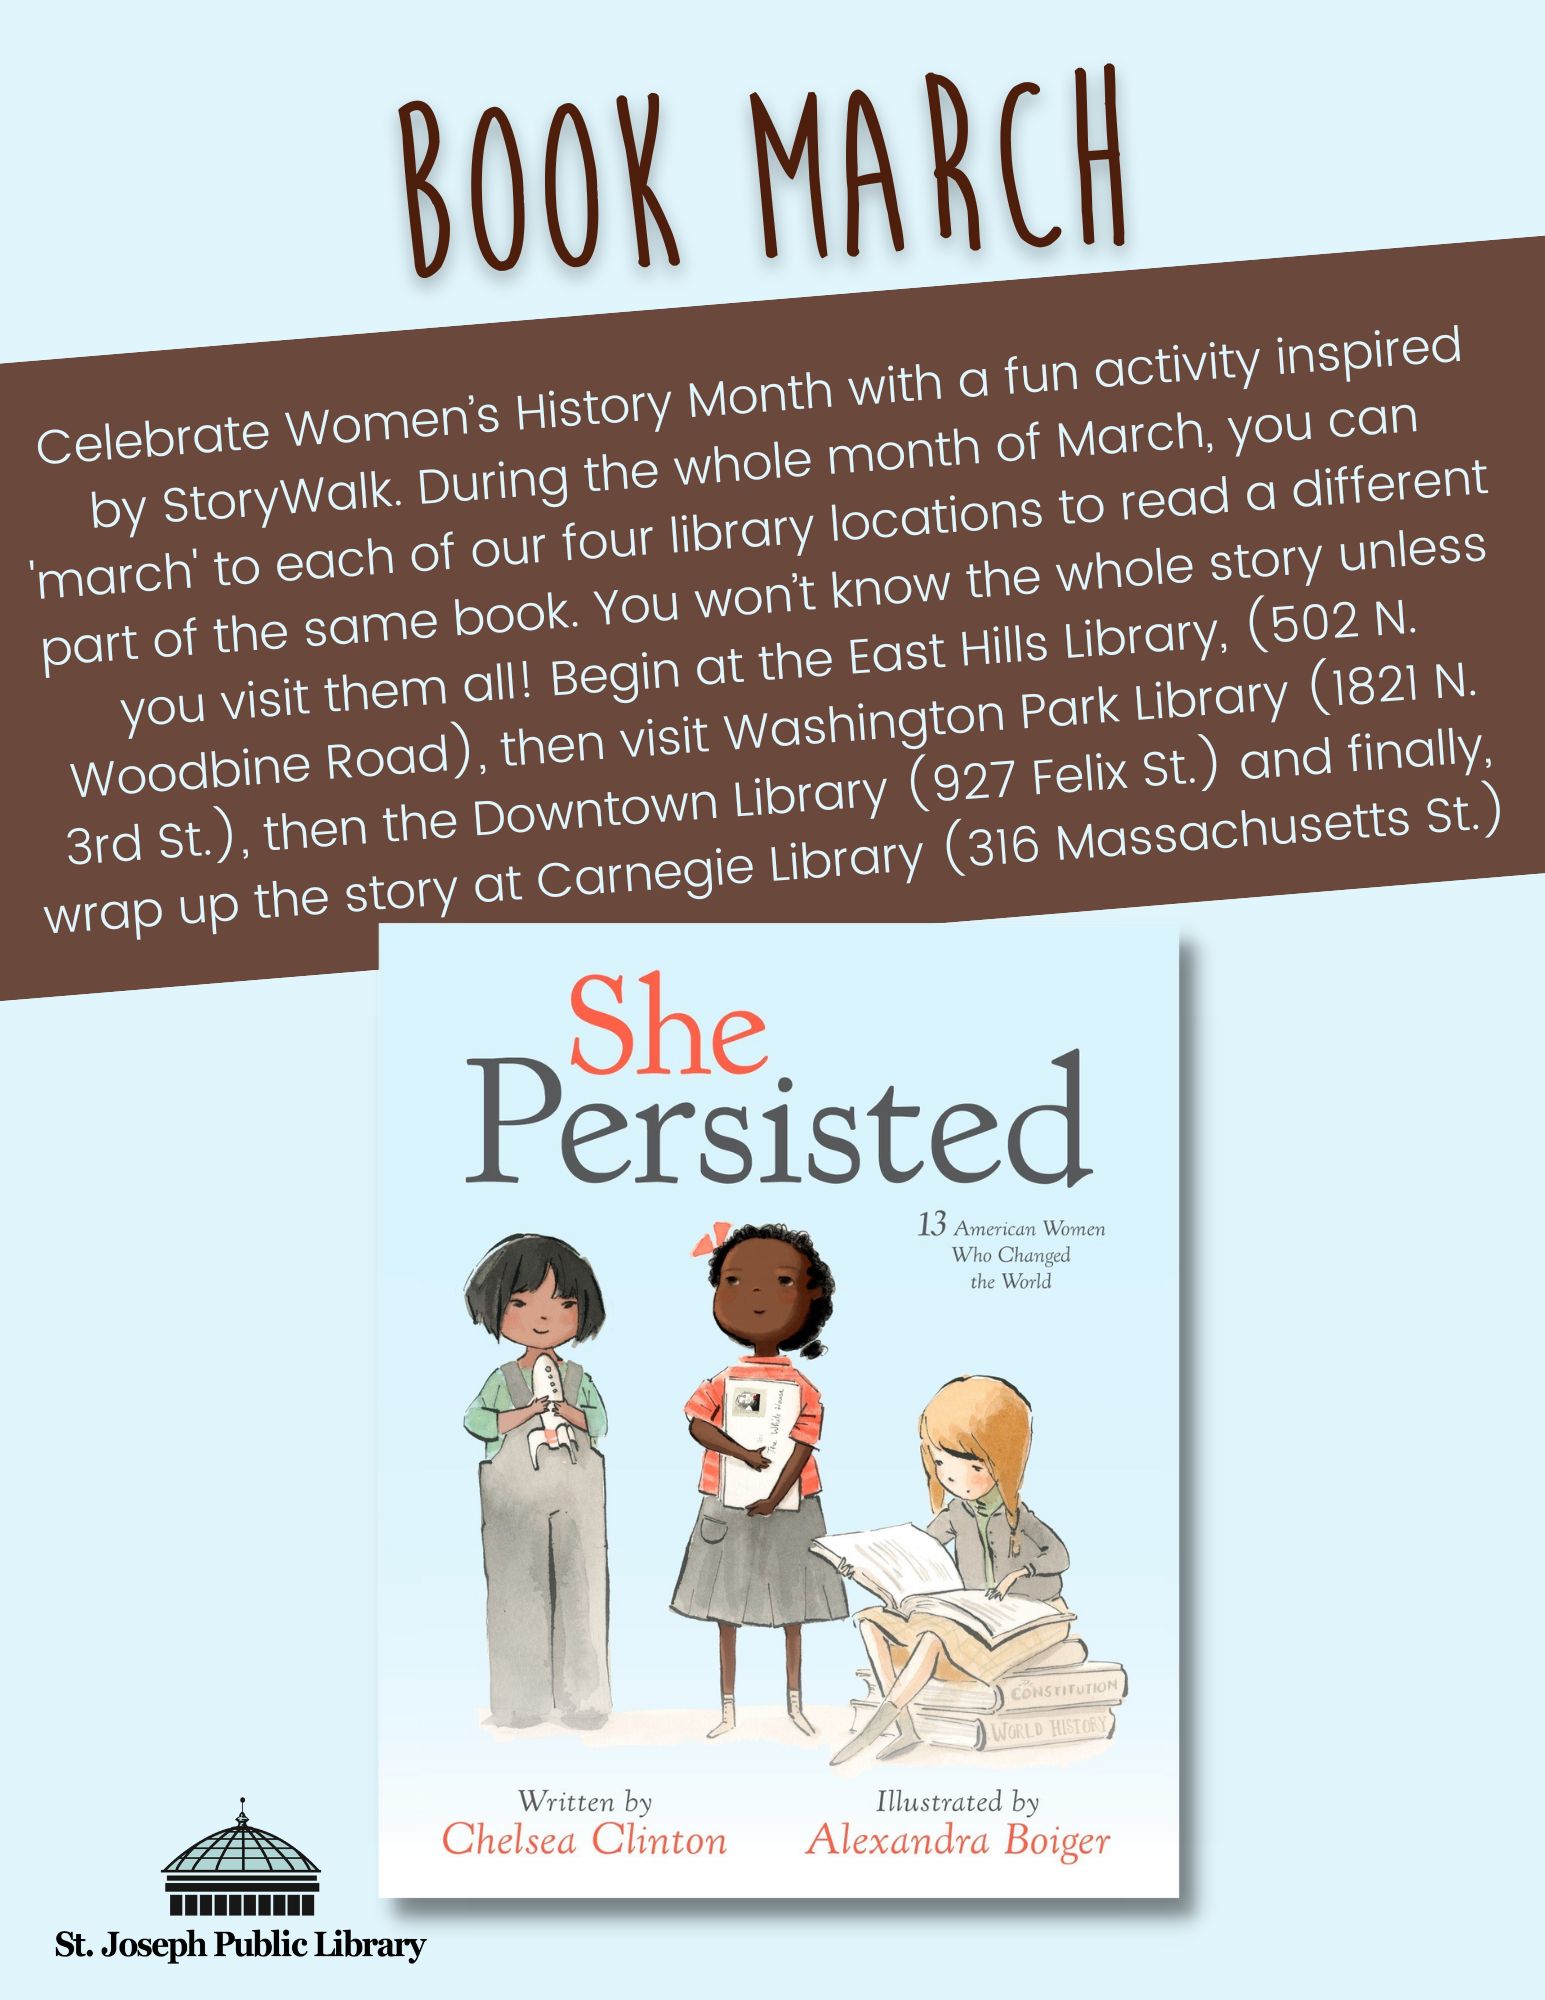 She Persisited book cover with Book March text information as in the below description.